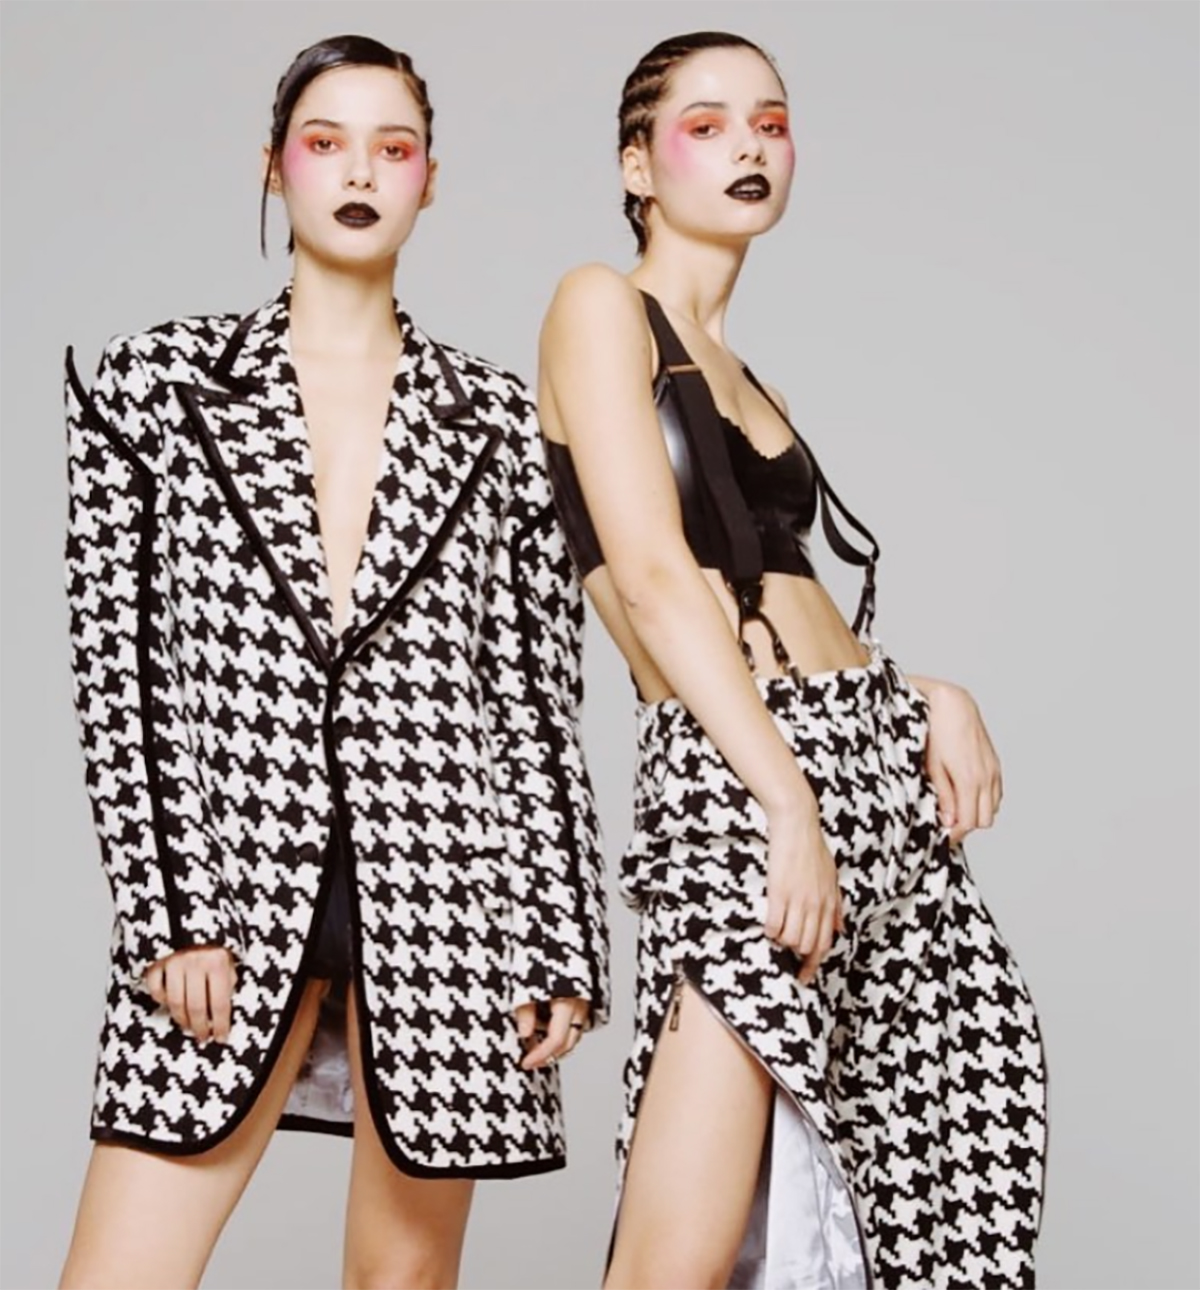 Two female twin models dressed in black and white